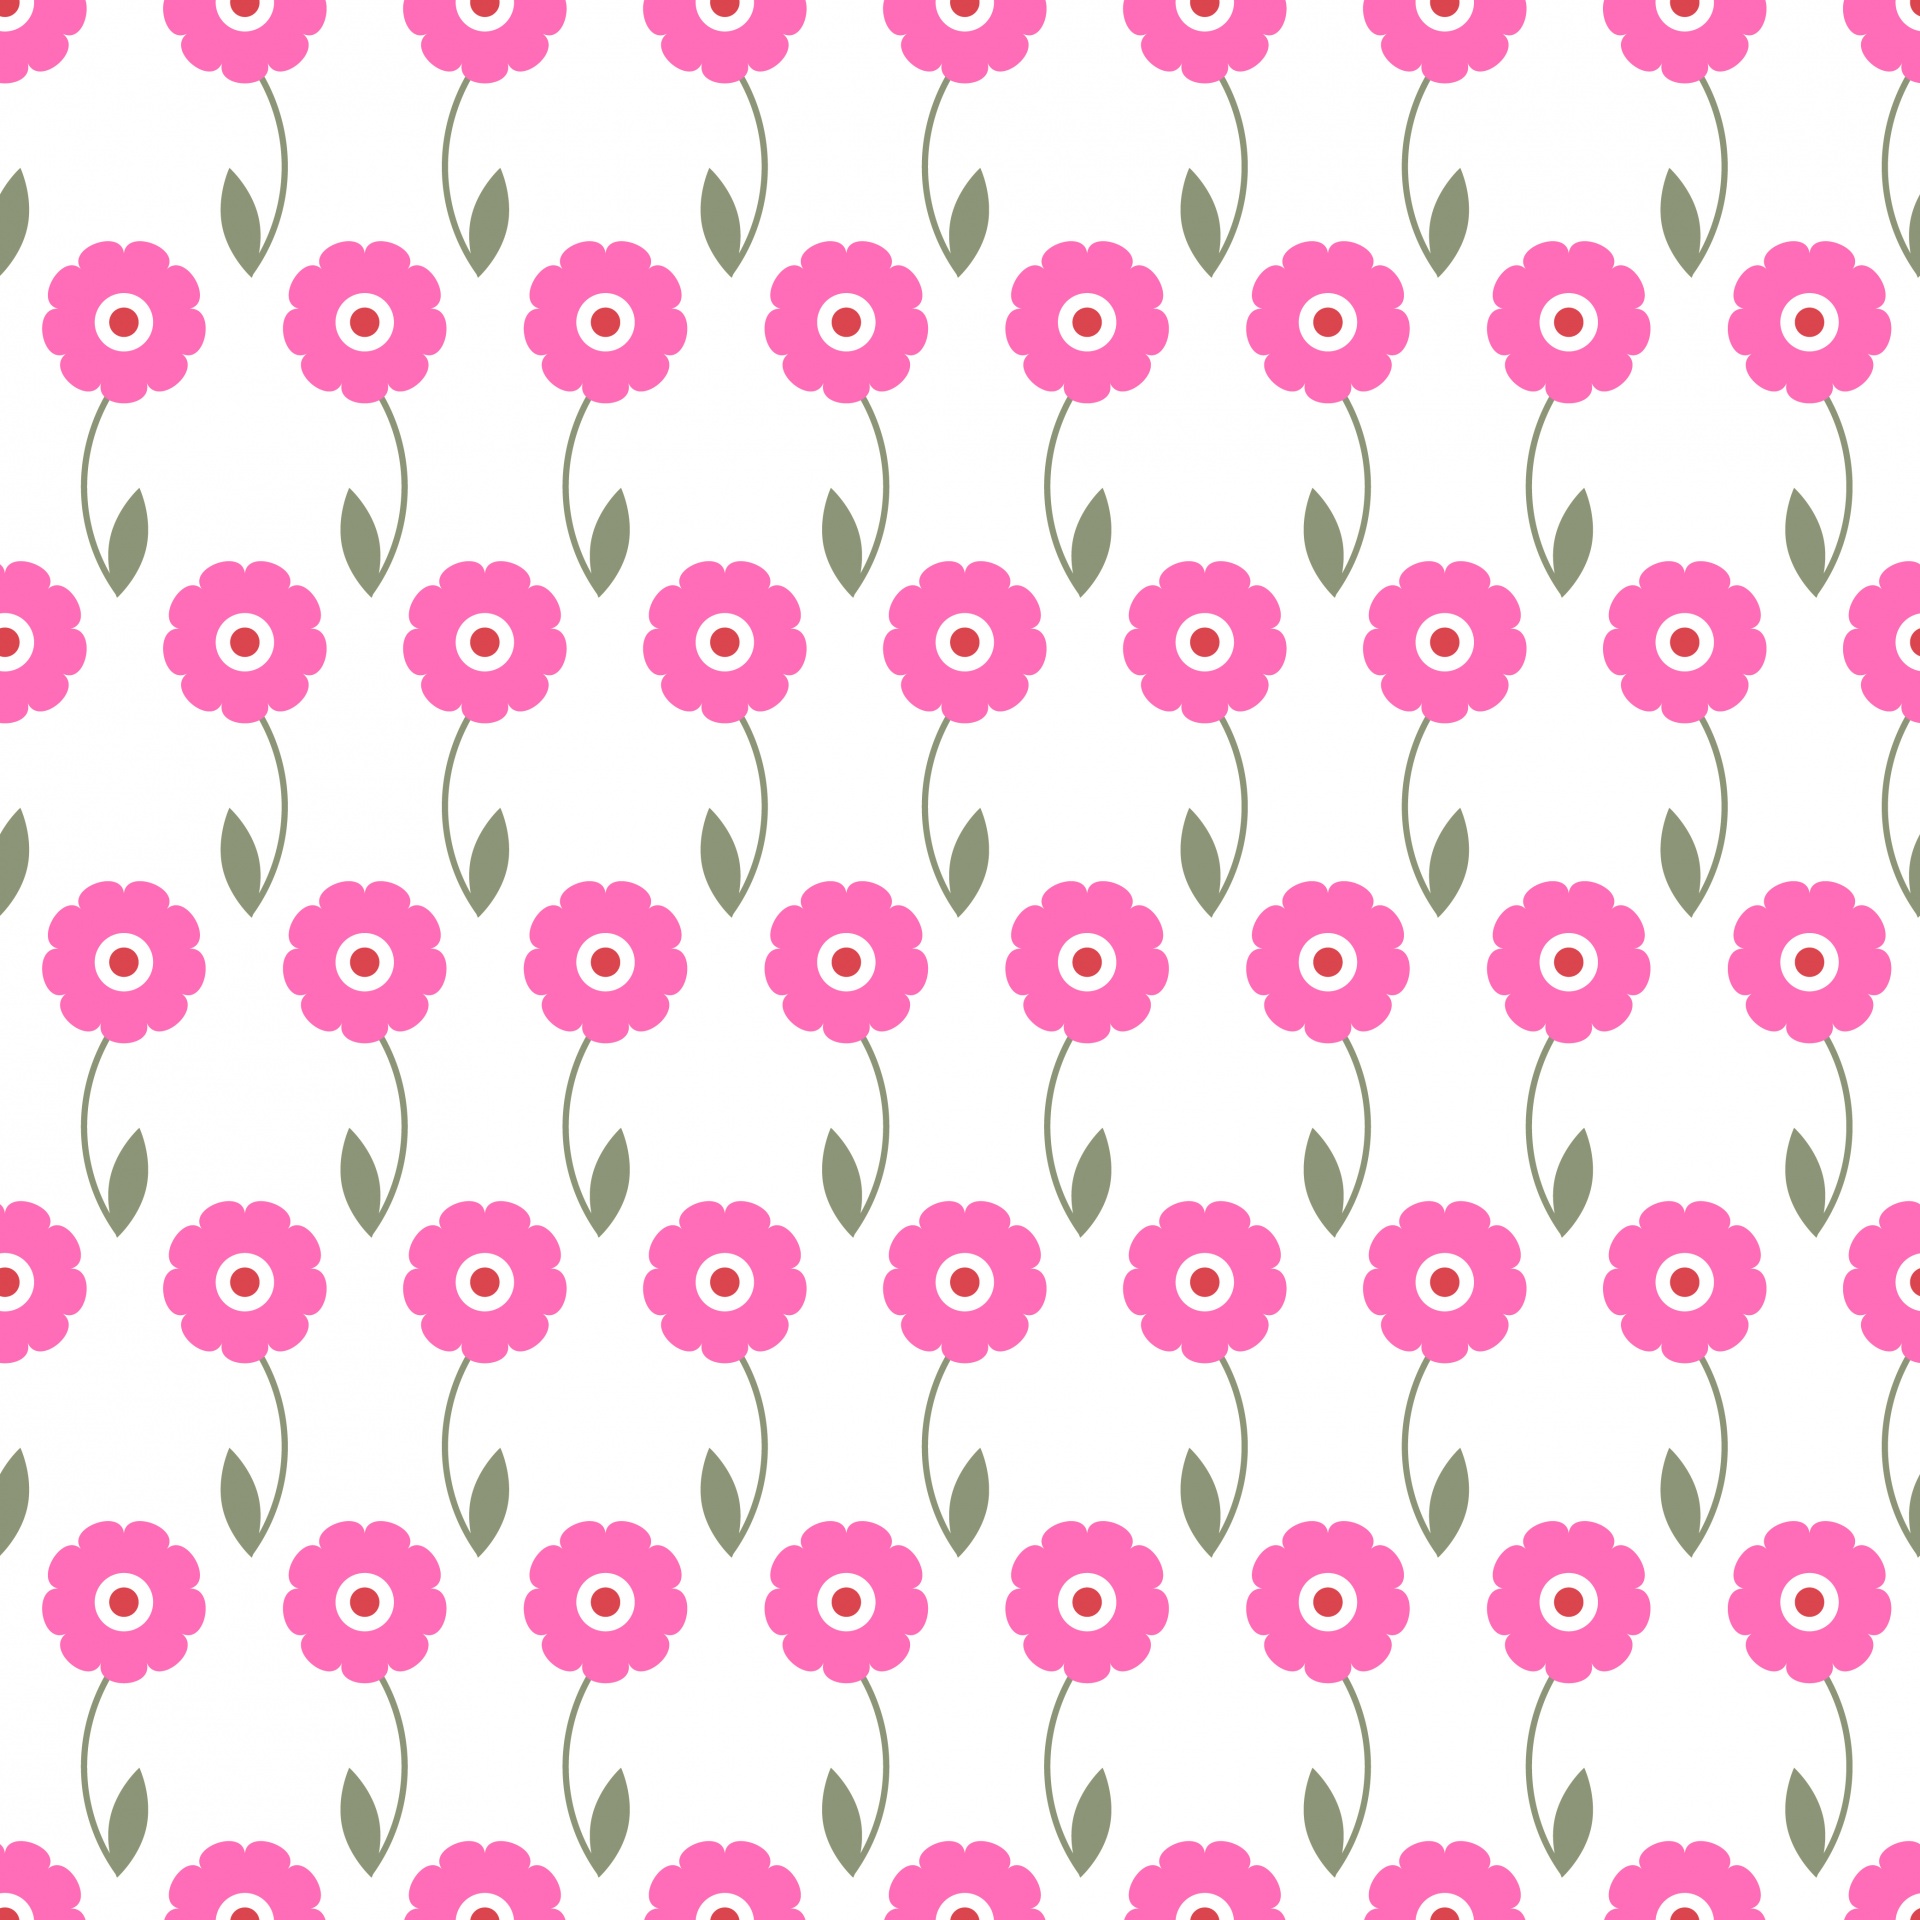 floral wallpaper background free photo